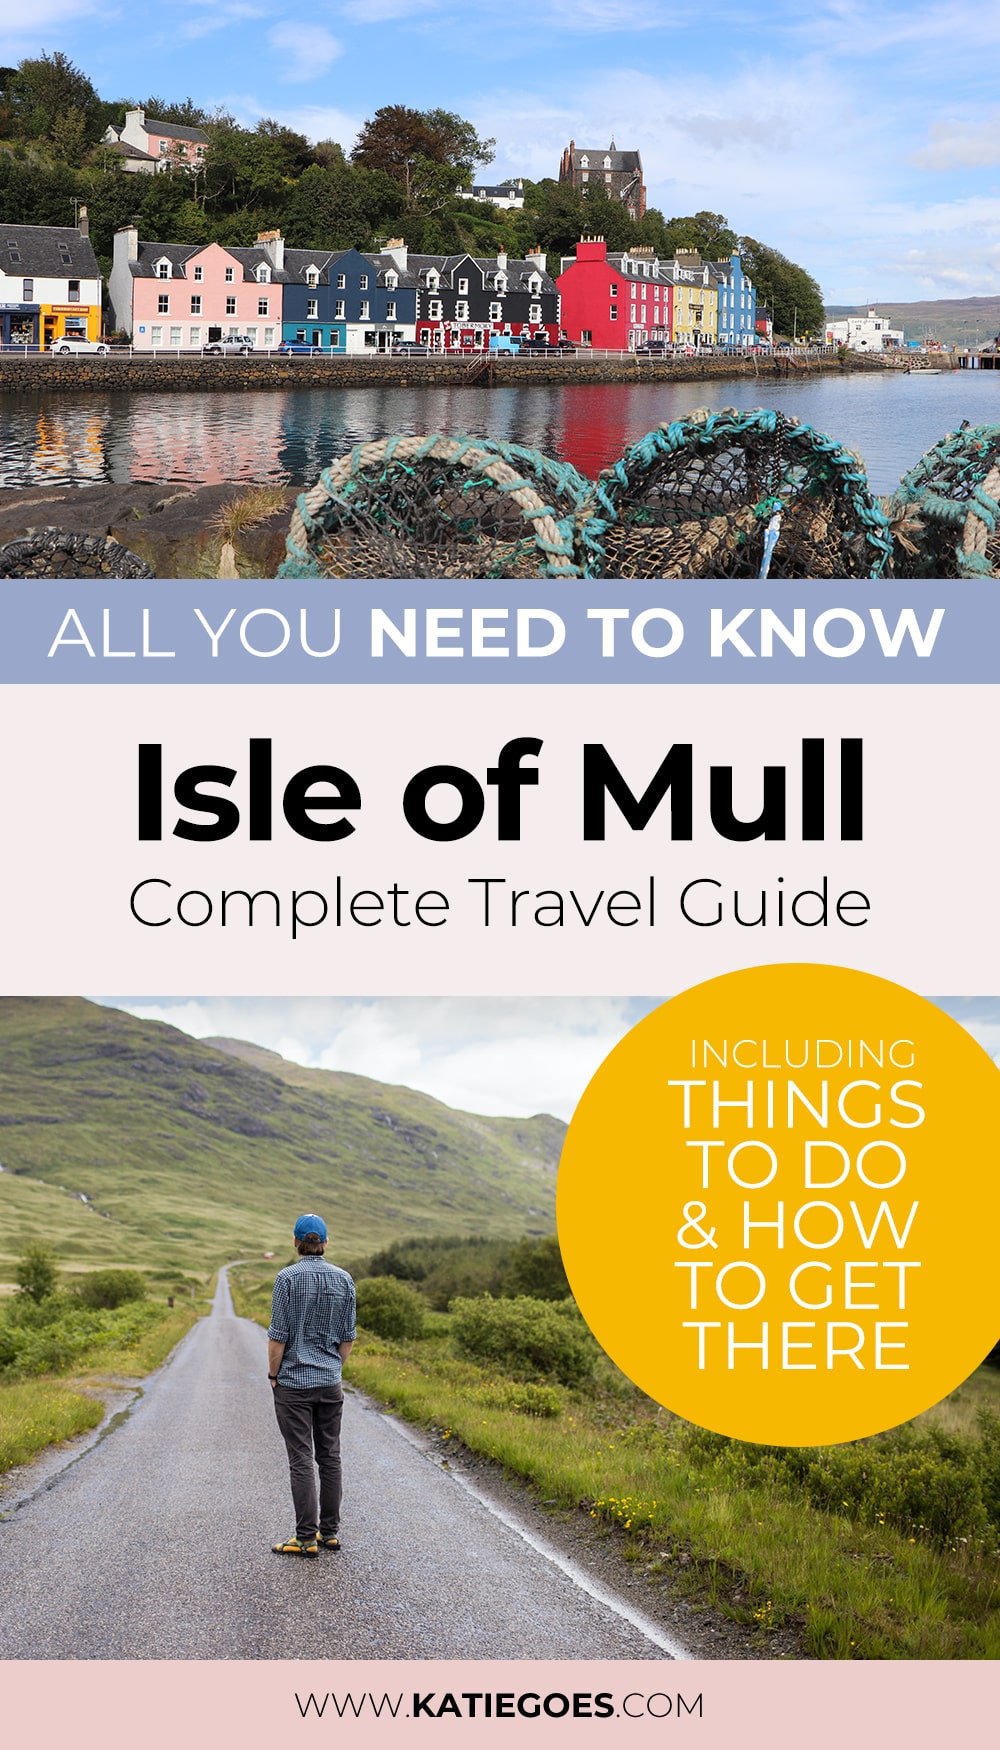 Isle of Mull Information: Things To Do & Where To Stay 29